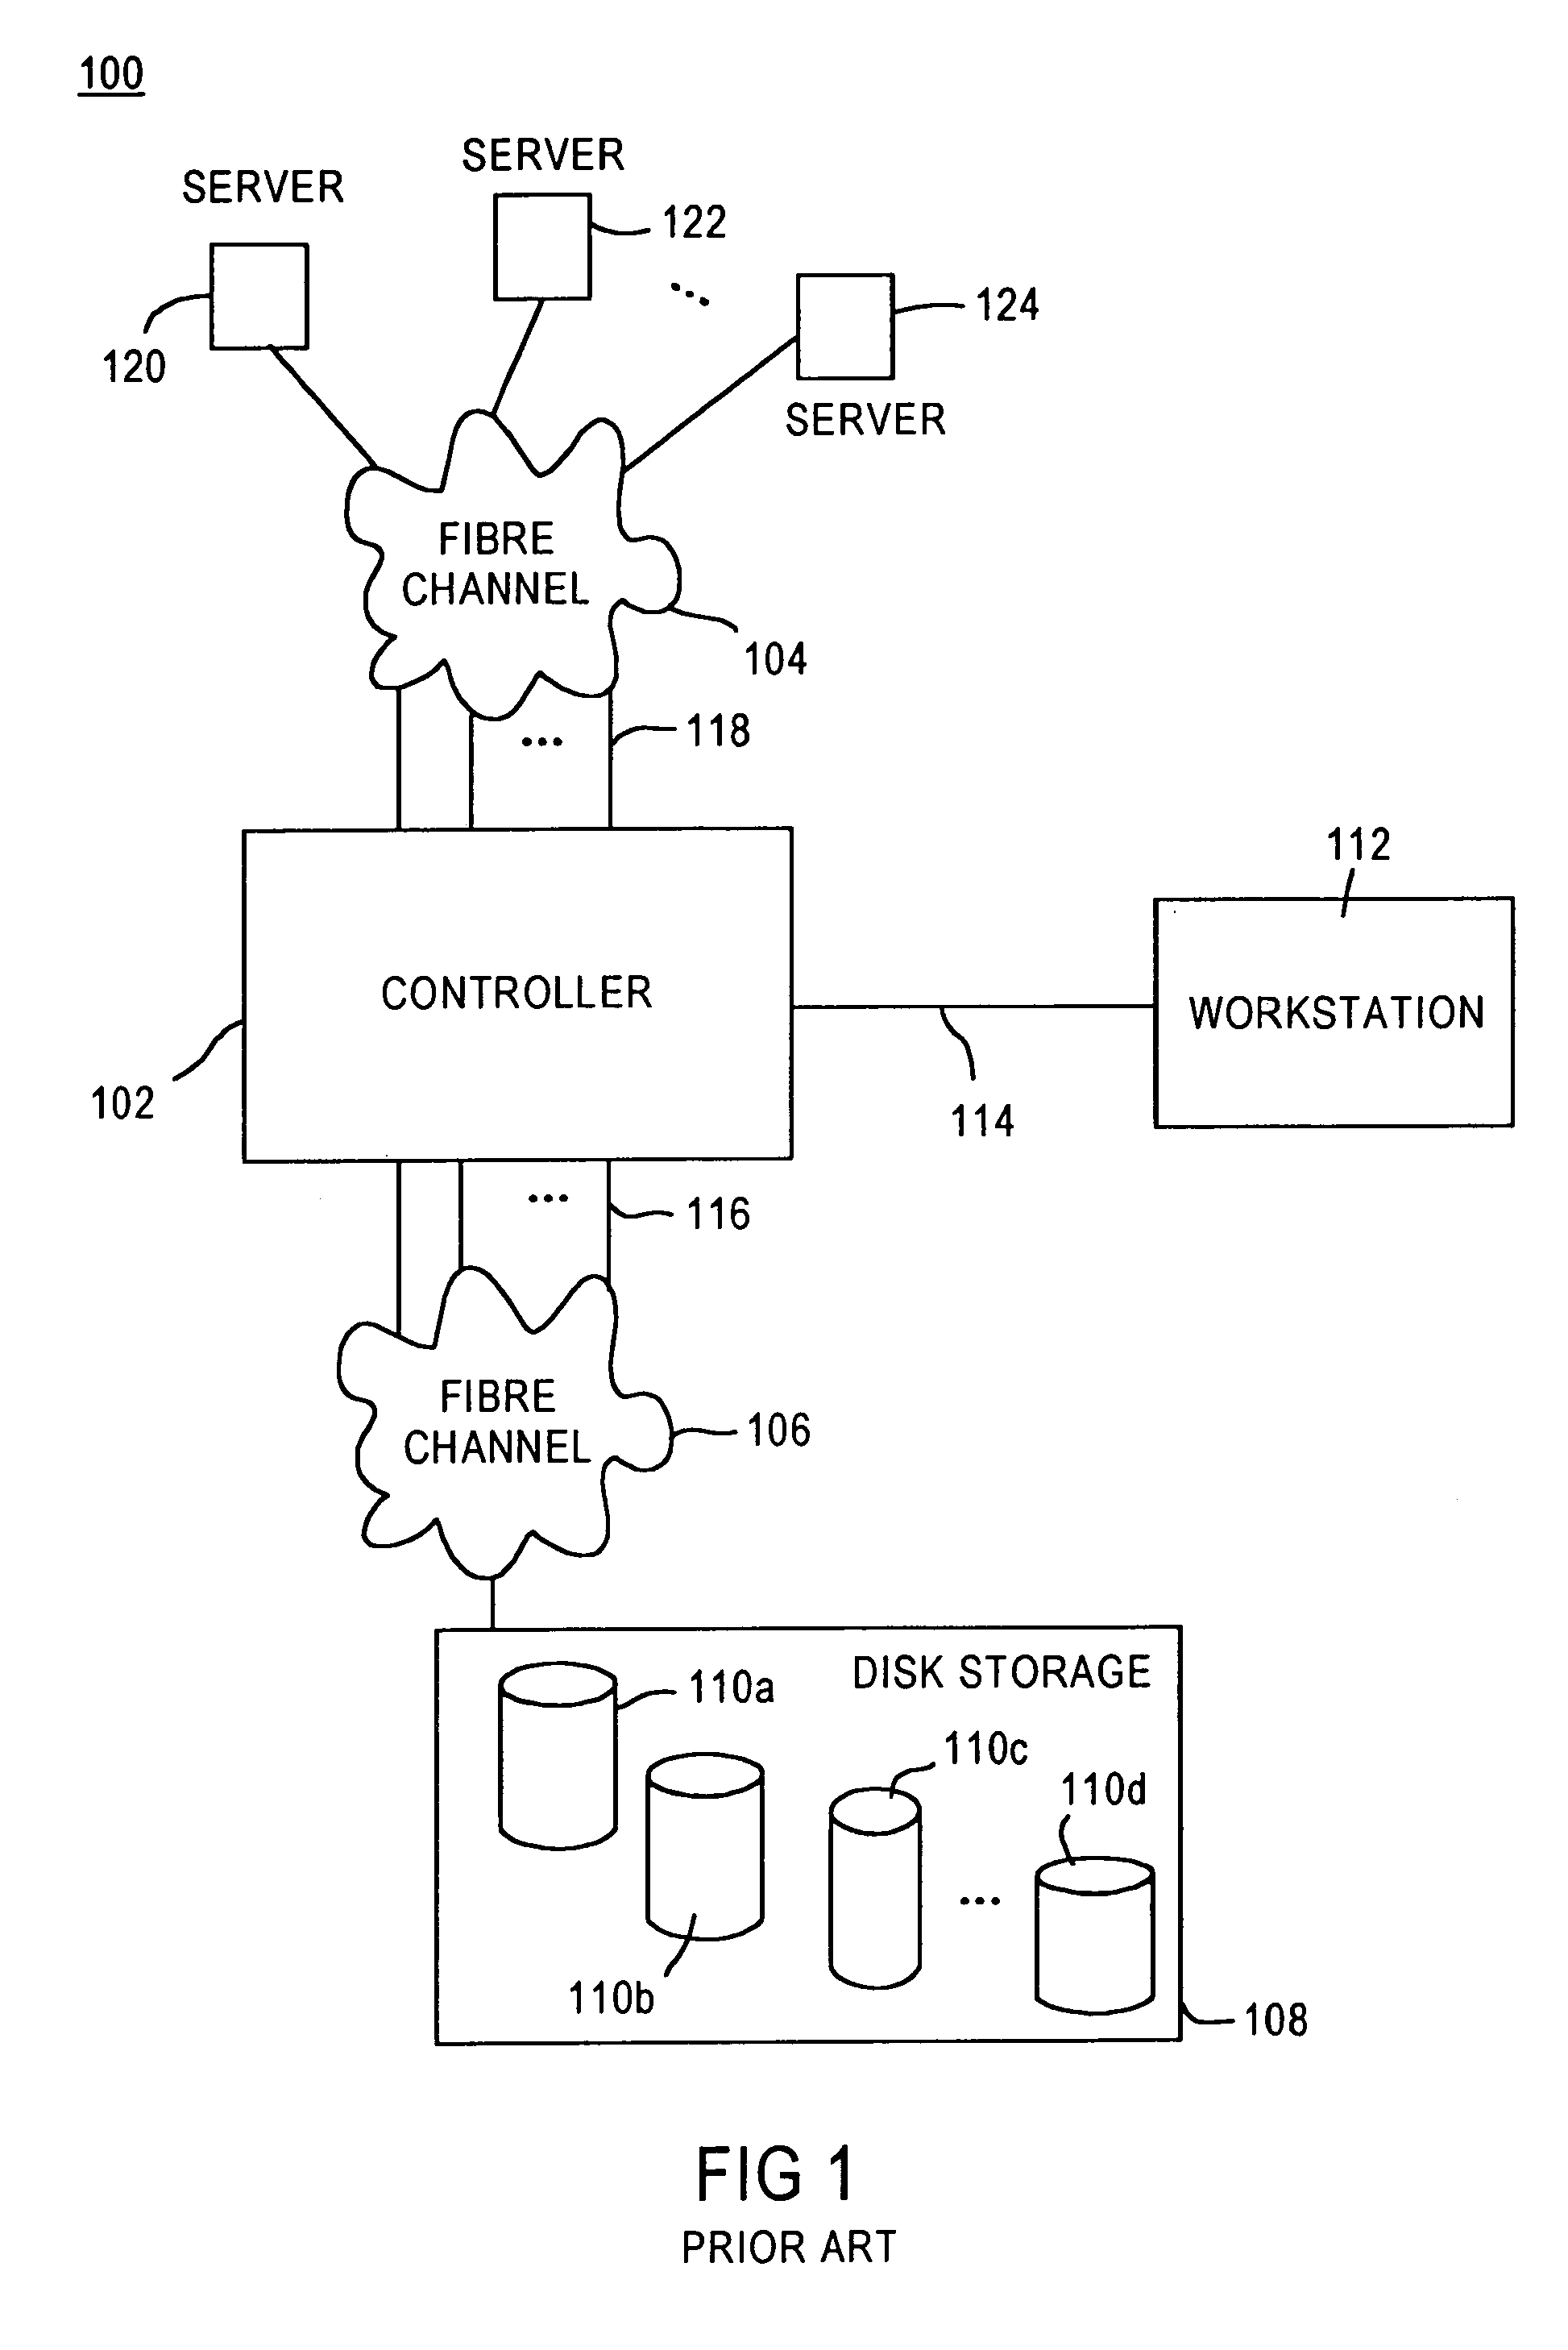 System and method for redundant communication between redundant controllers